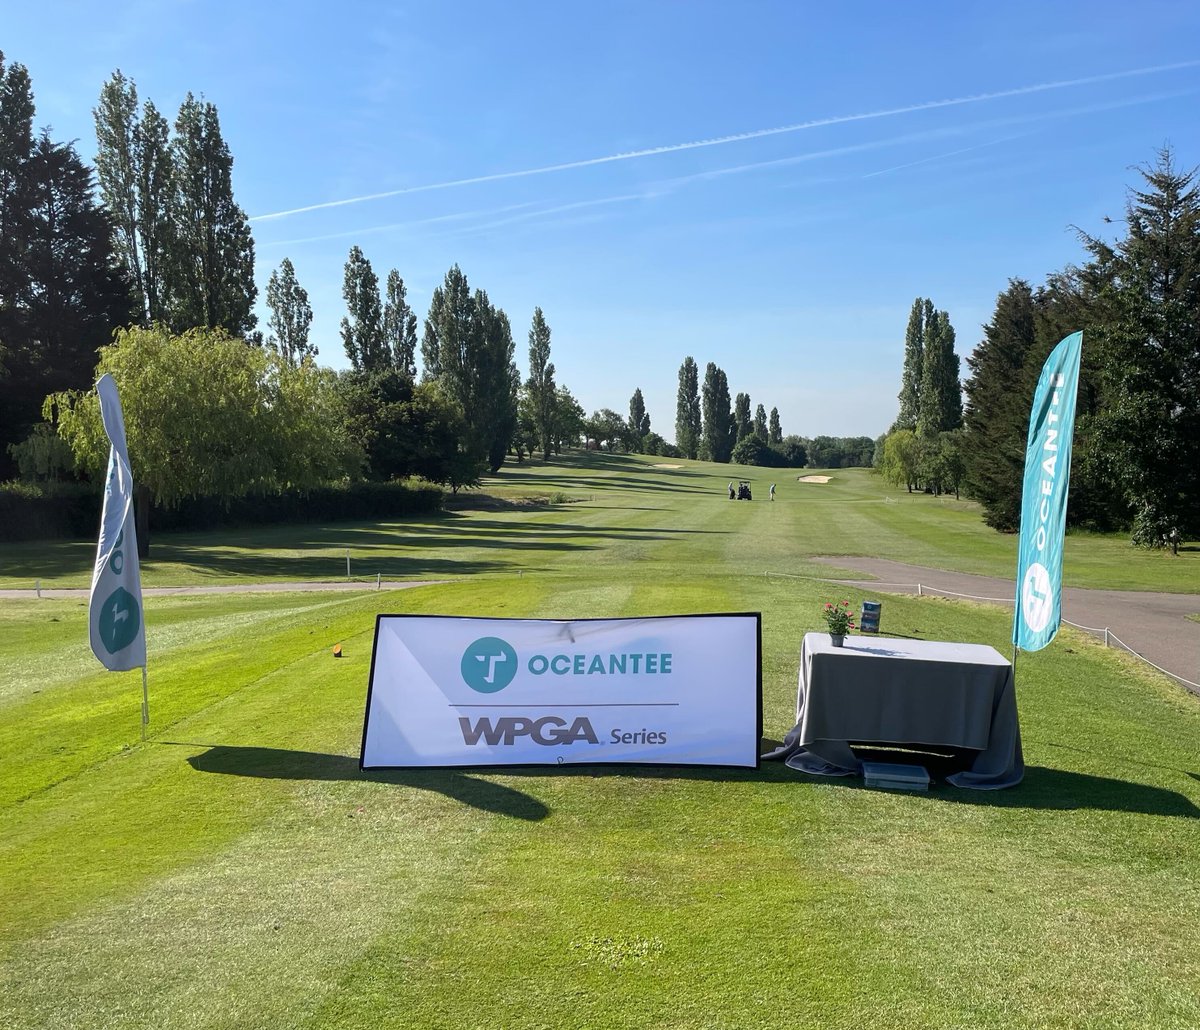 🌞 Good day sunshine - perfect conditions at @threeriversgolf today for the second @OceanTeeGolf
 WPGA Stroke Play. ⛳

You can follow live scoring here 👉 bit.ly/3xvVCPd

We will also be providing regular updates throughout the day!

#OceanTeeWPGASeries